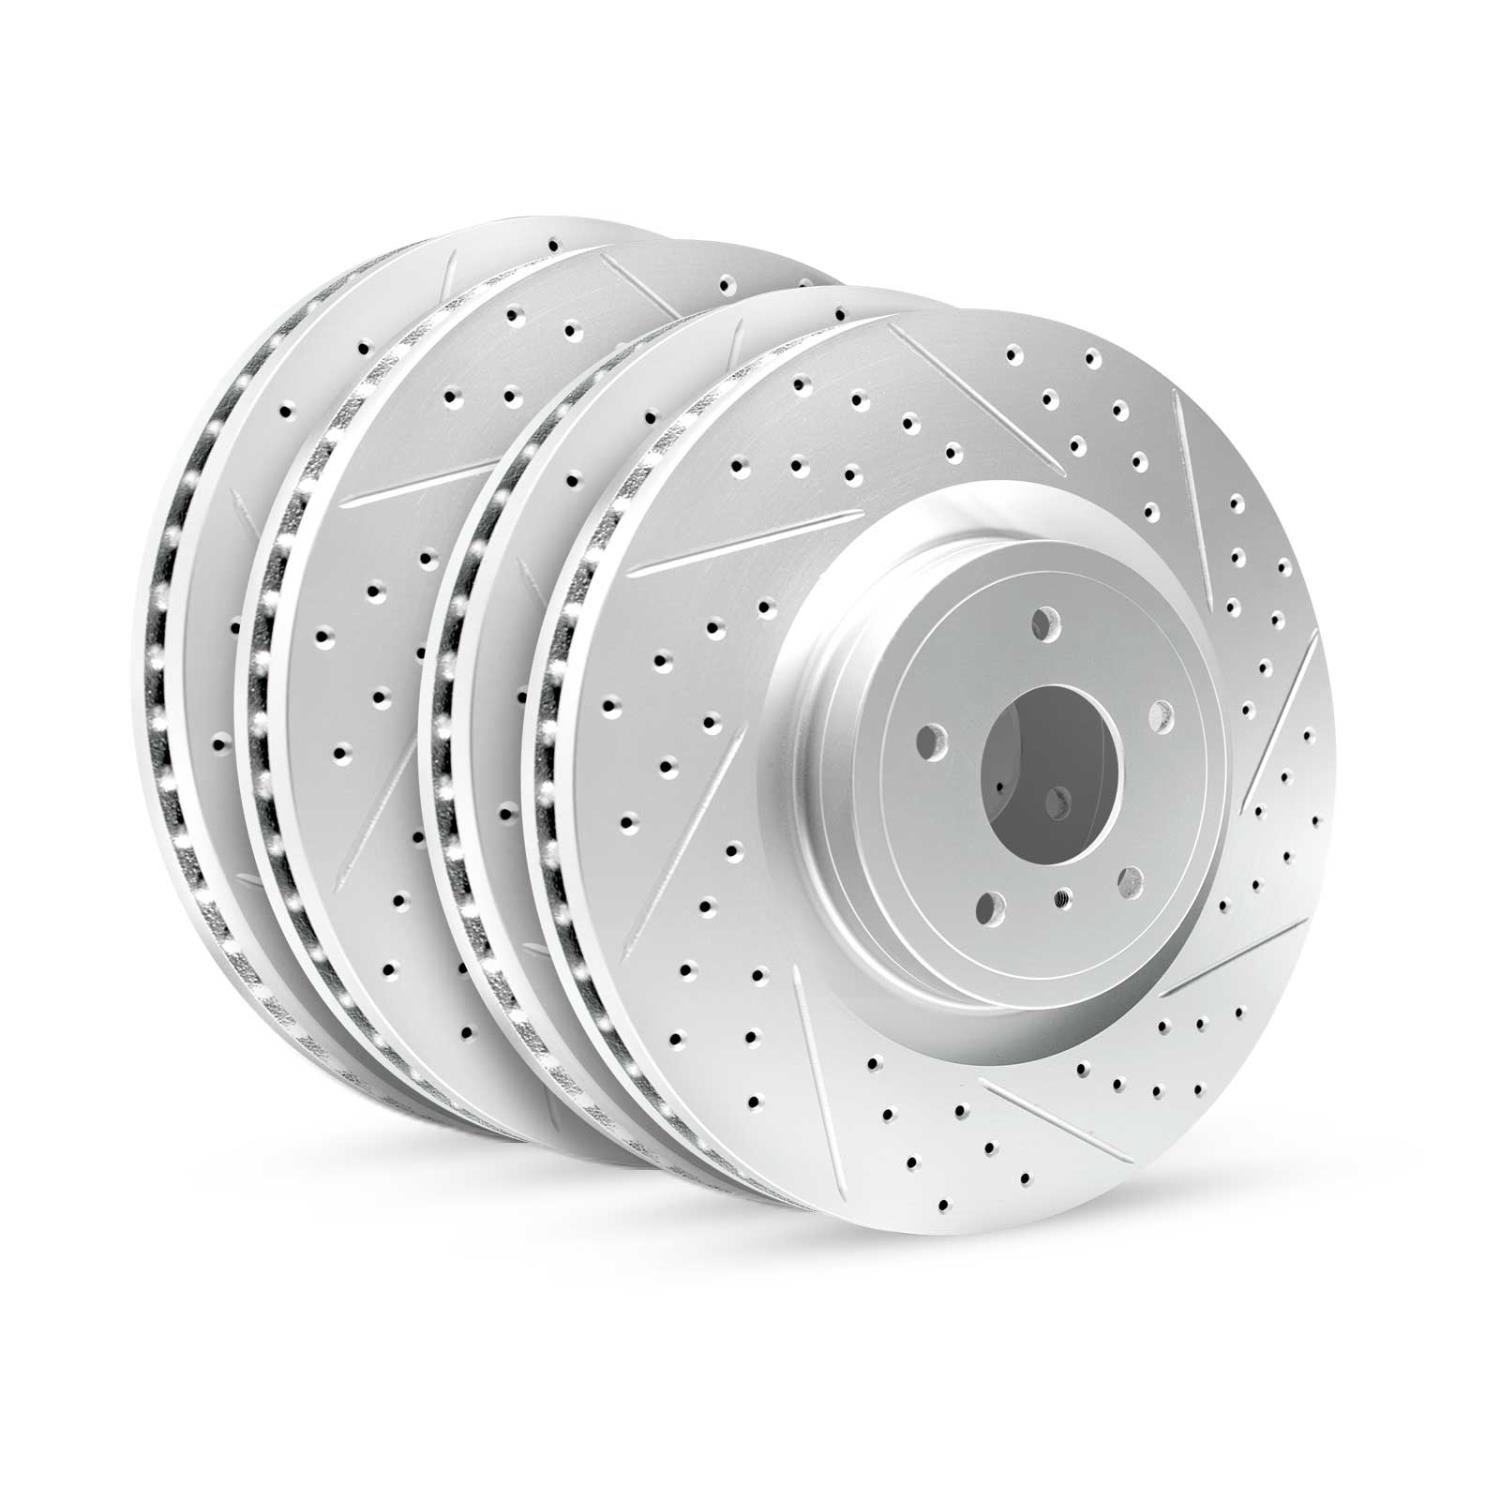 GEO-Carbon Drilled/Slotted Rotors, 2007-2010 BMW, Position: